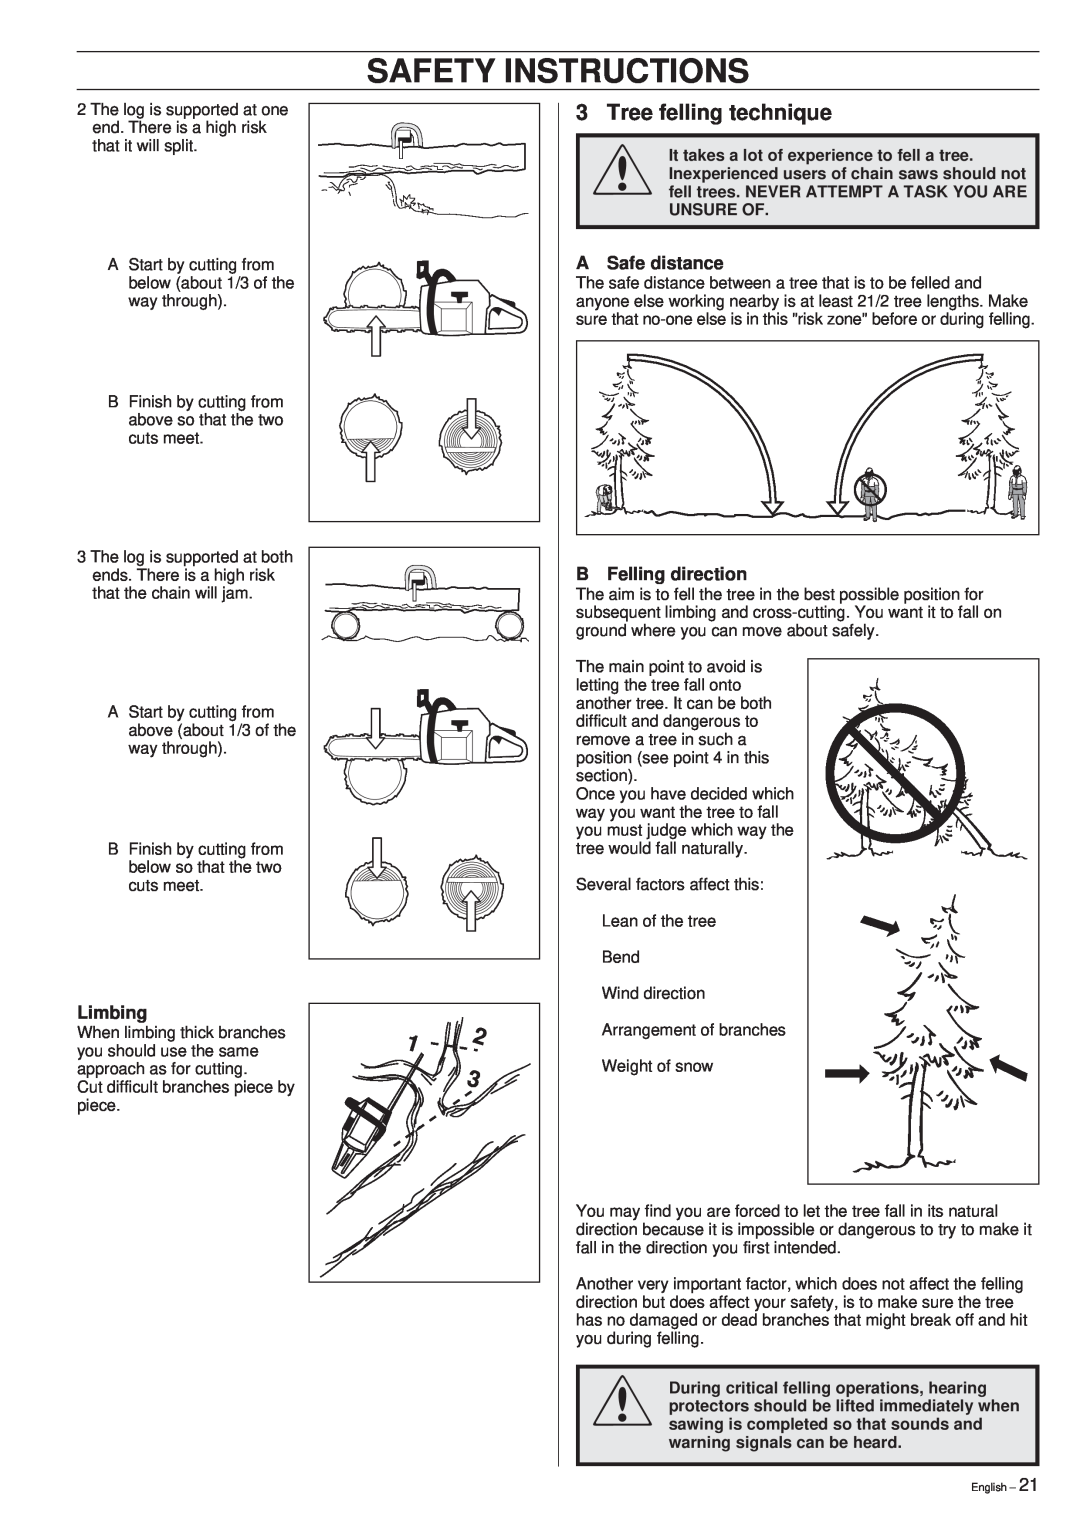 Husqvarna 288XP/XP lite manual Safety Instructions, Tree felling technique, A Safe distance, Limbing, B Felling direction 